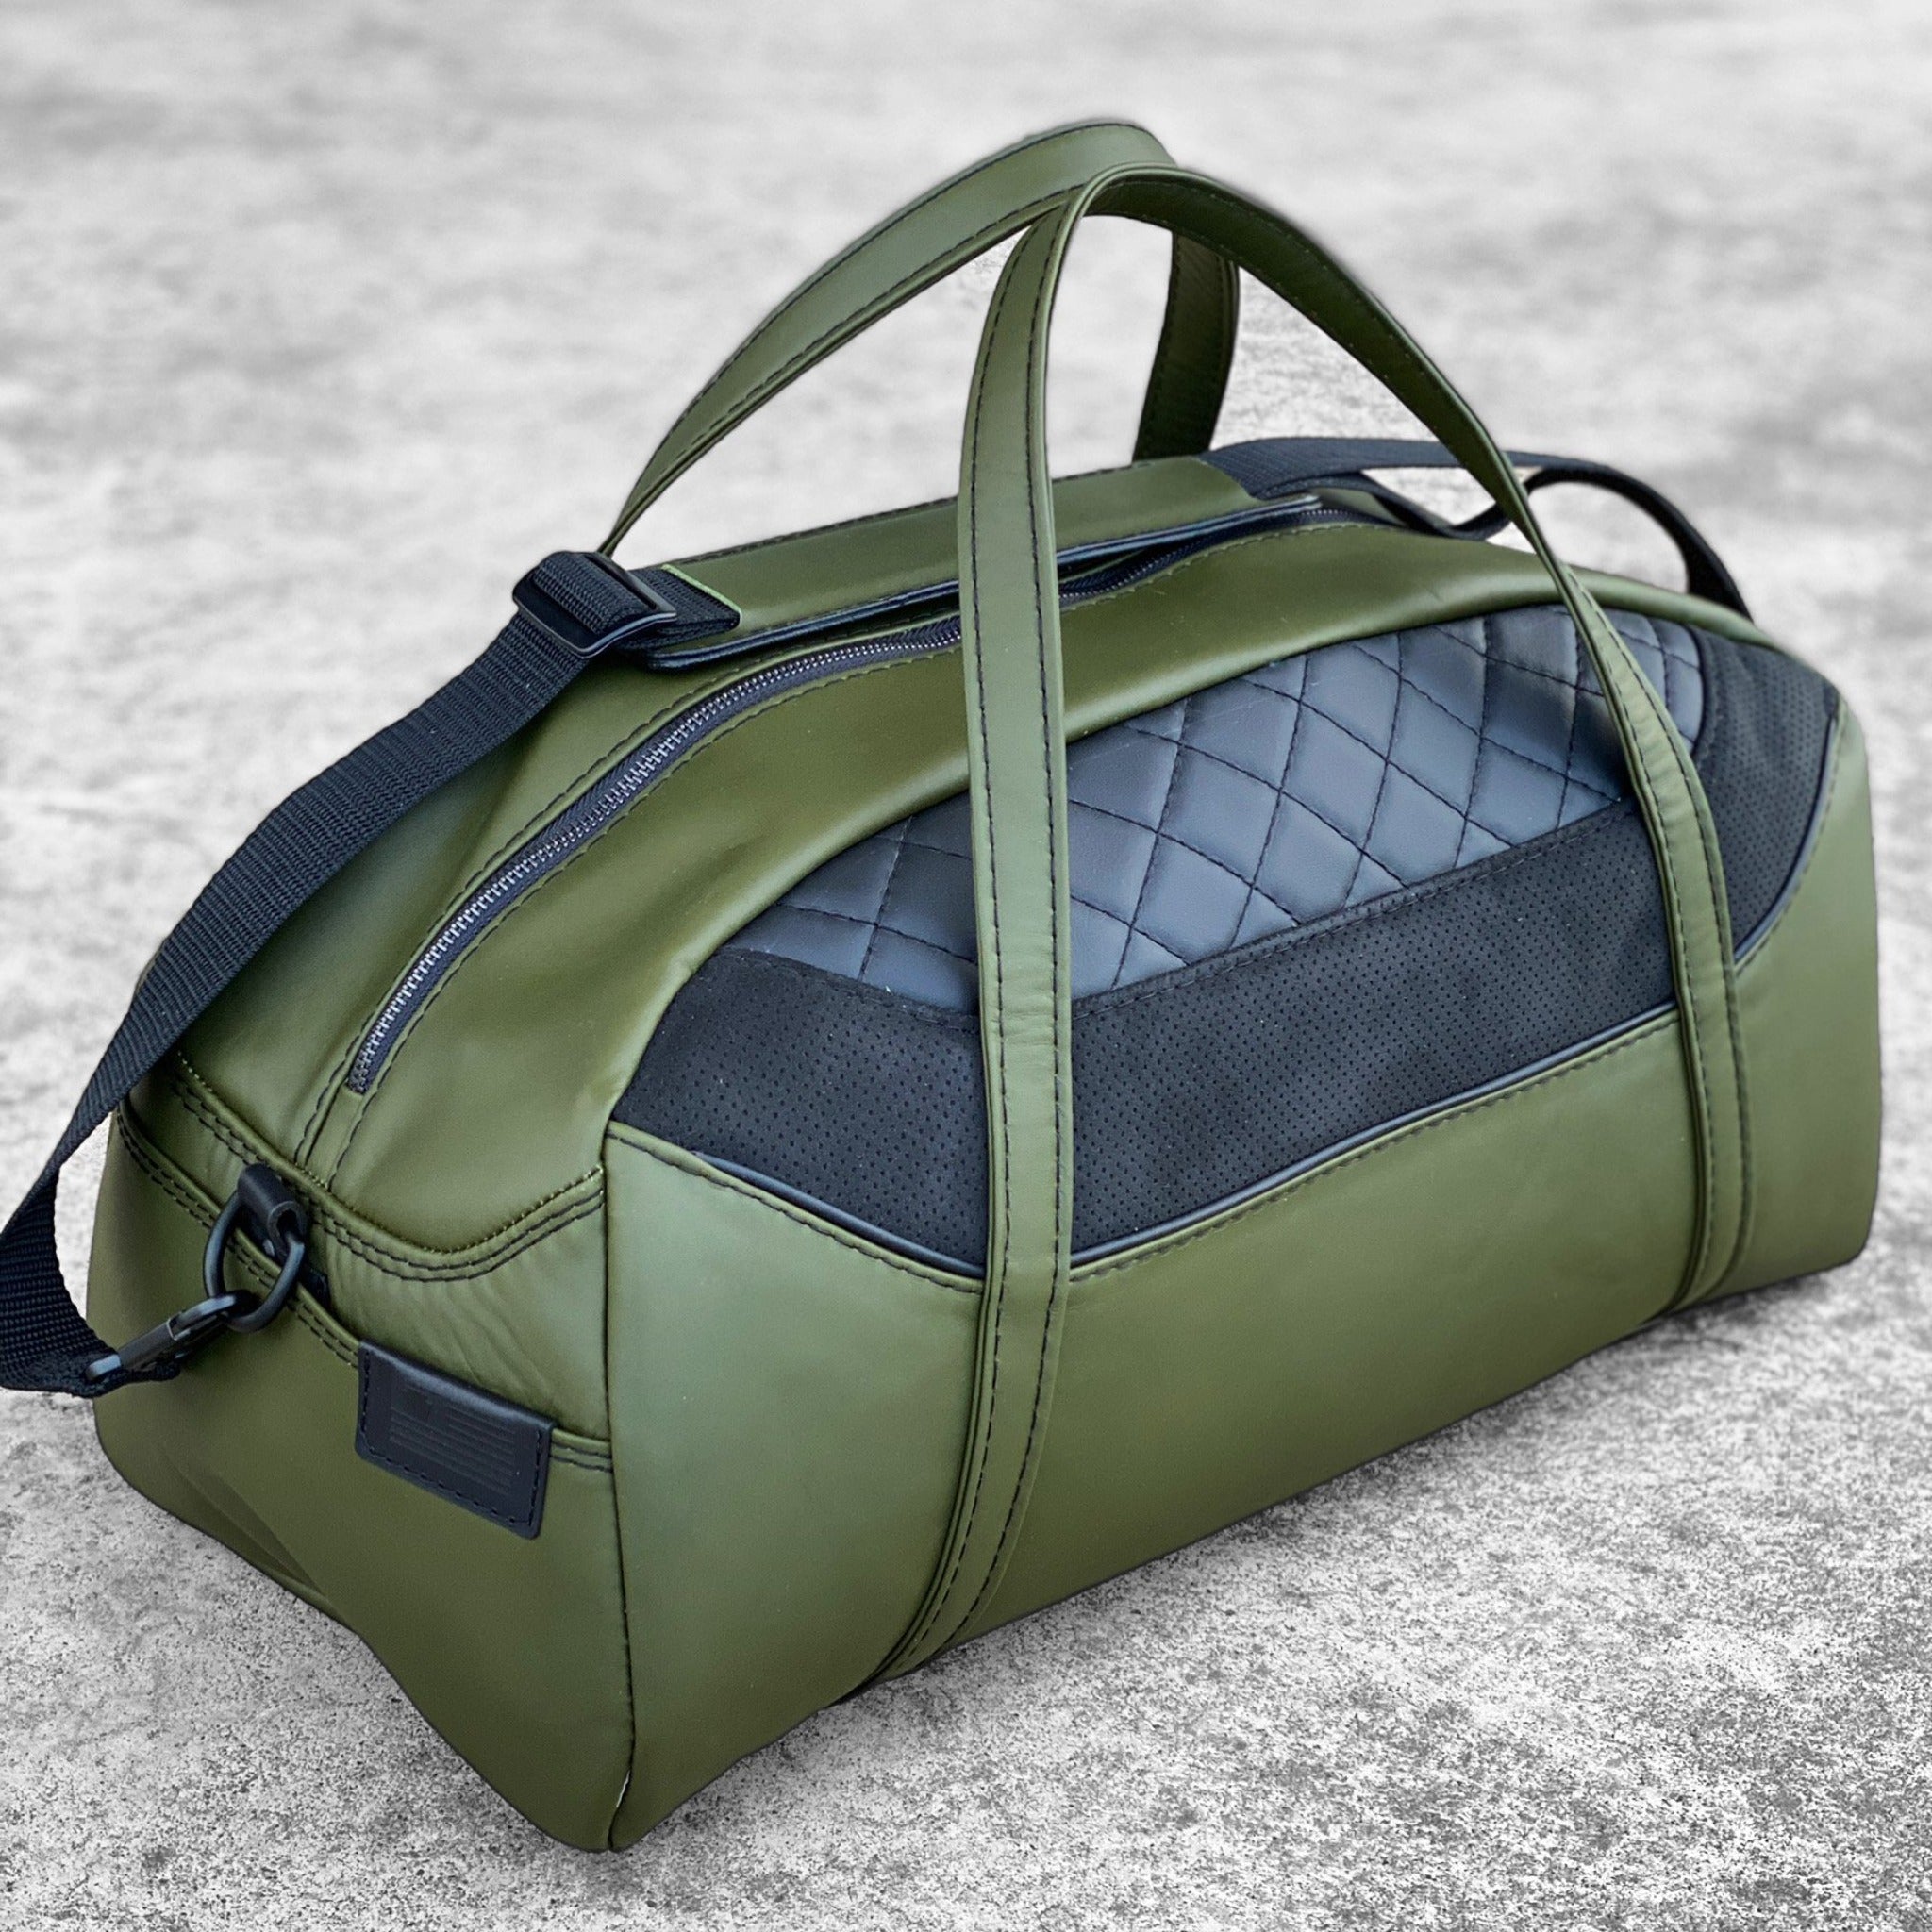 Distressed Leather Duffel Bag / Travel Bag- The Signature